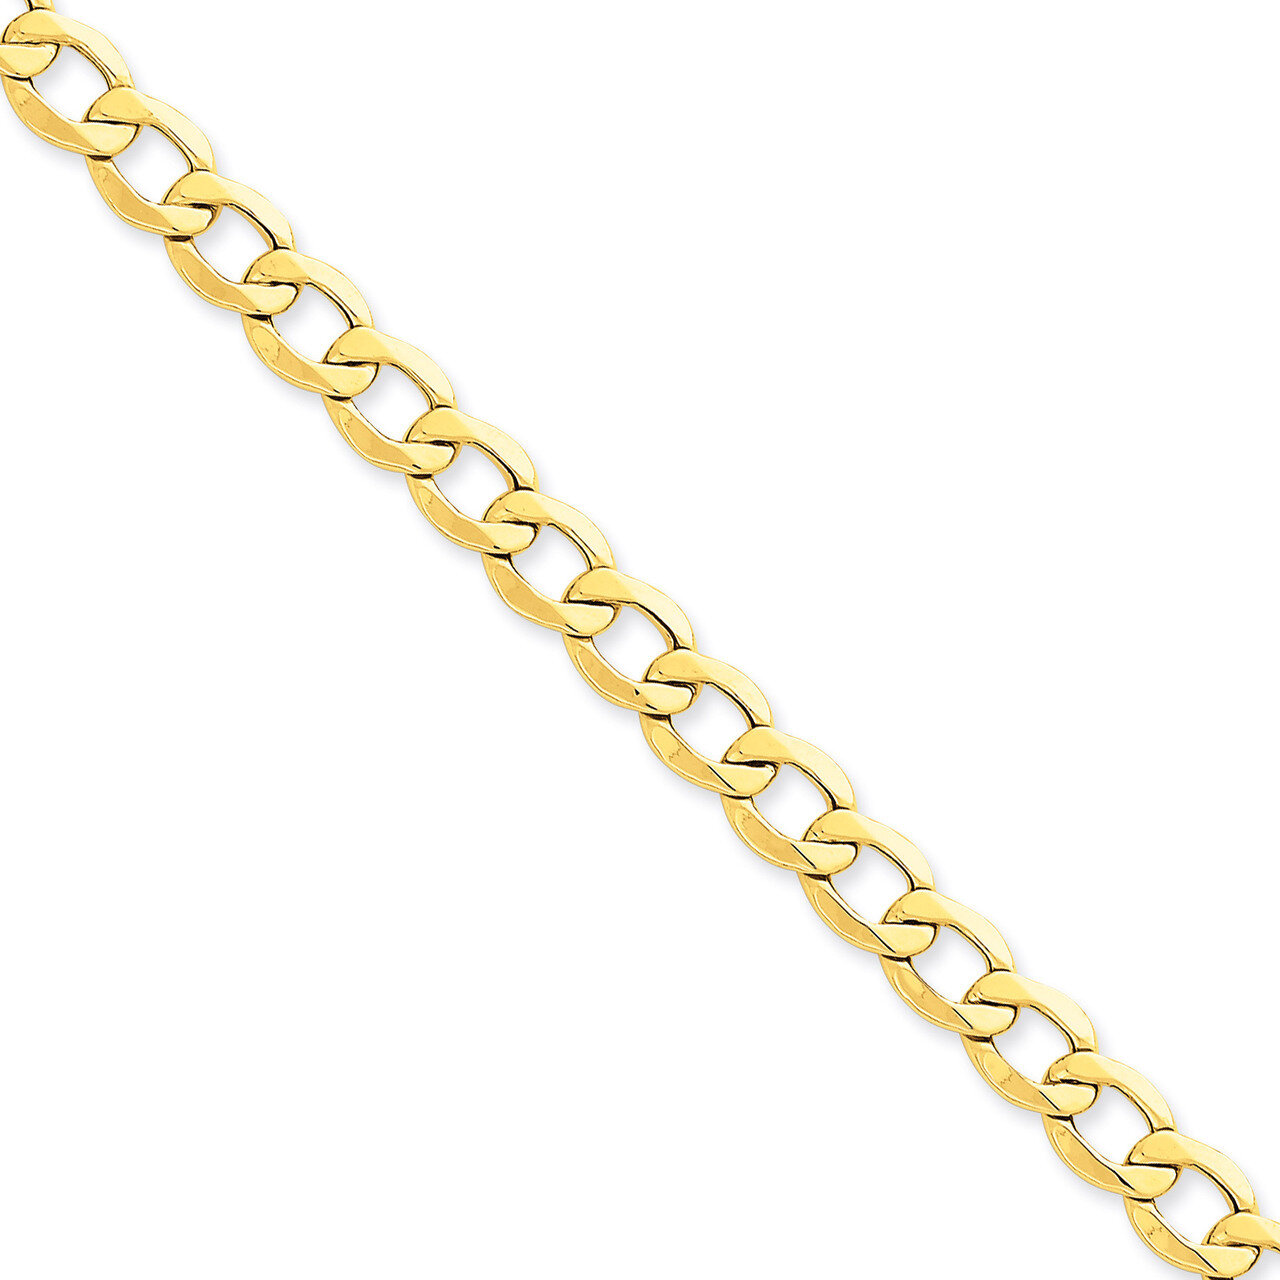 8.0mm Semi-Solid Curb Link Chain 24 Inch 14k Gold BC111-24